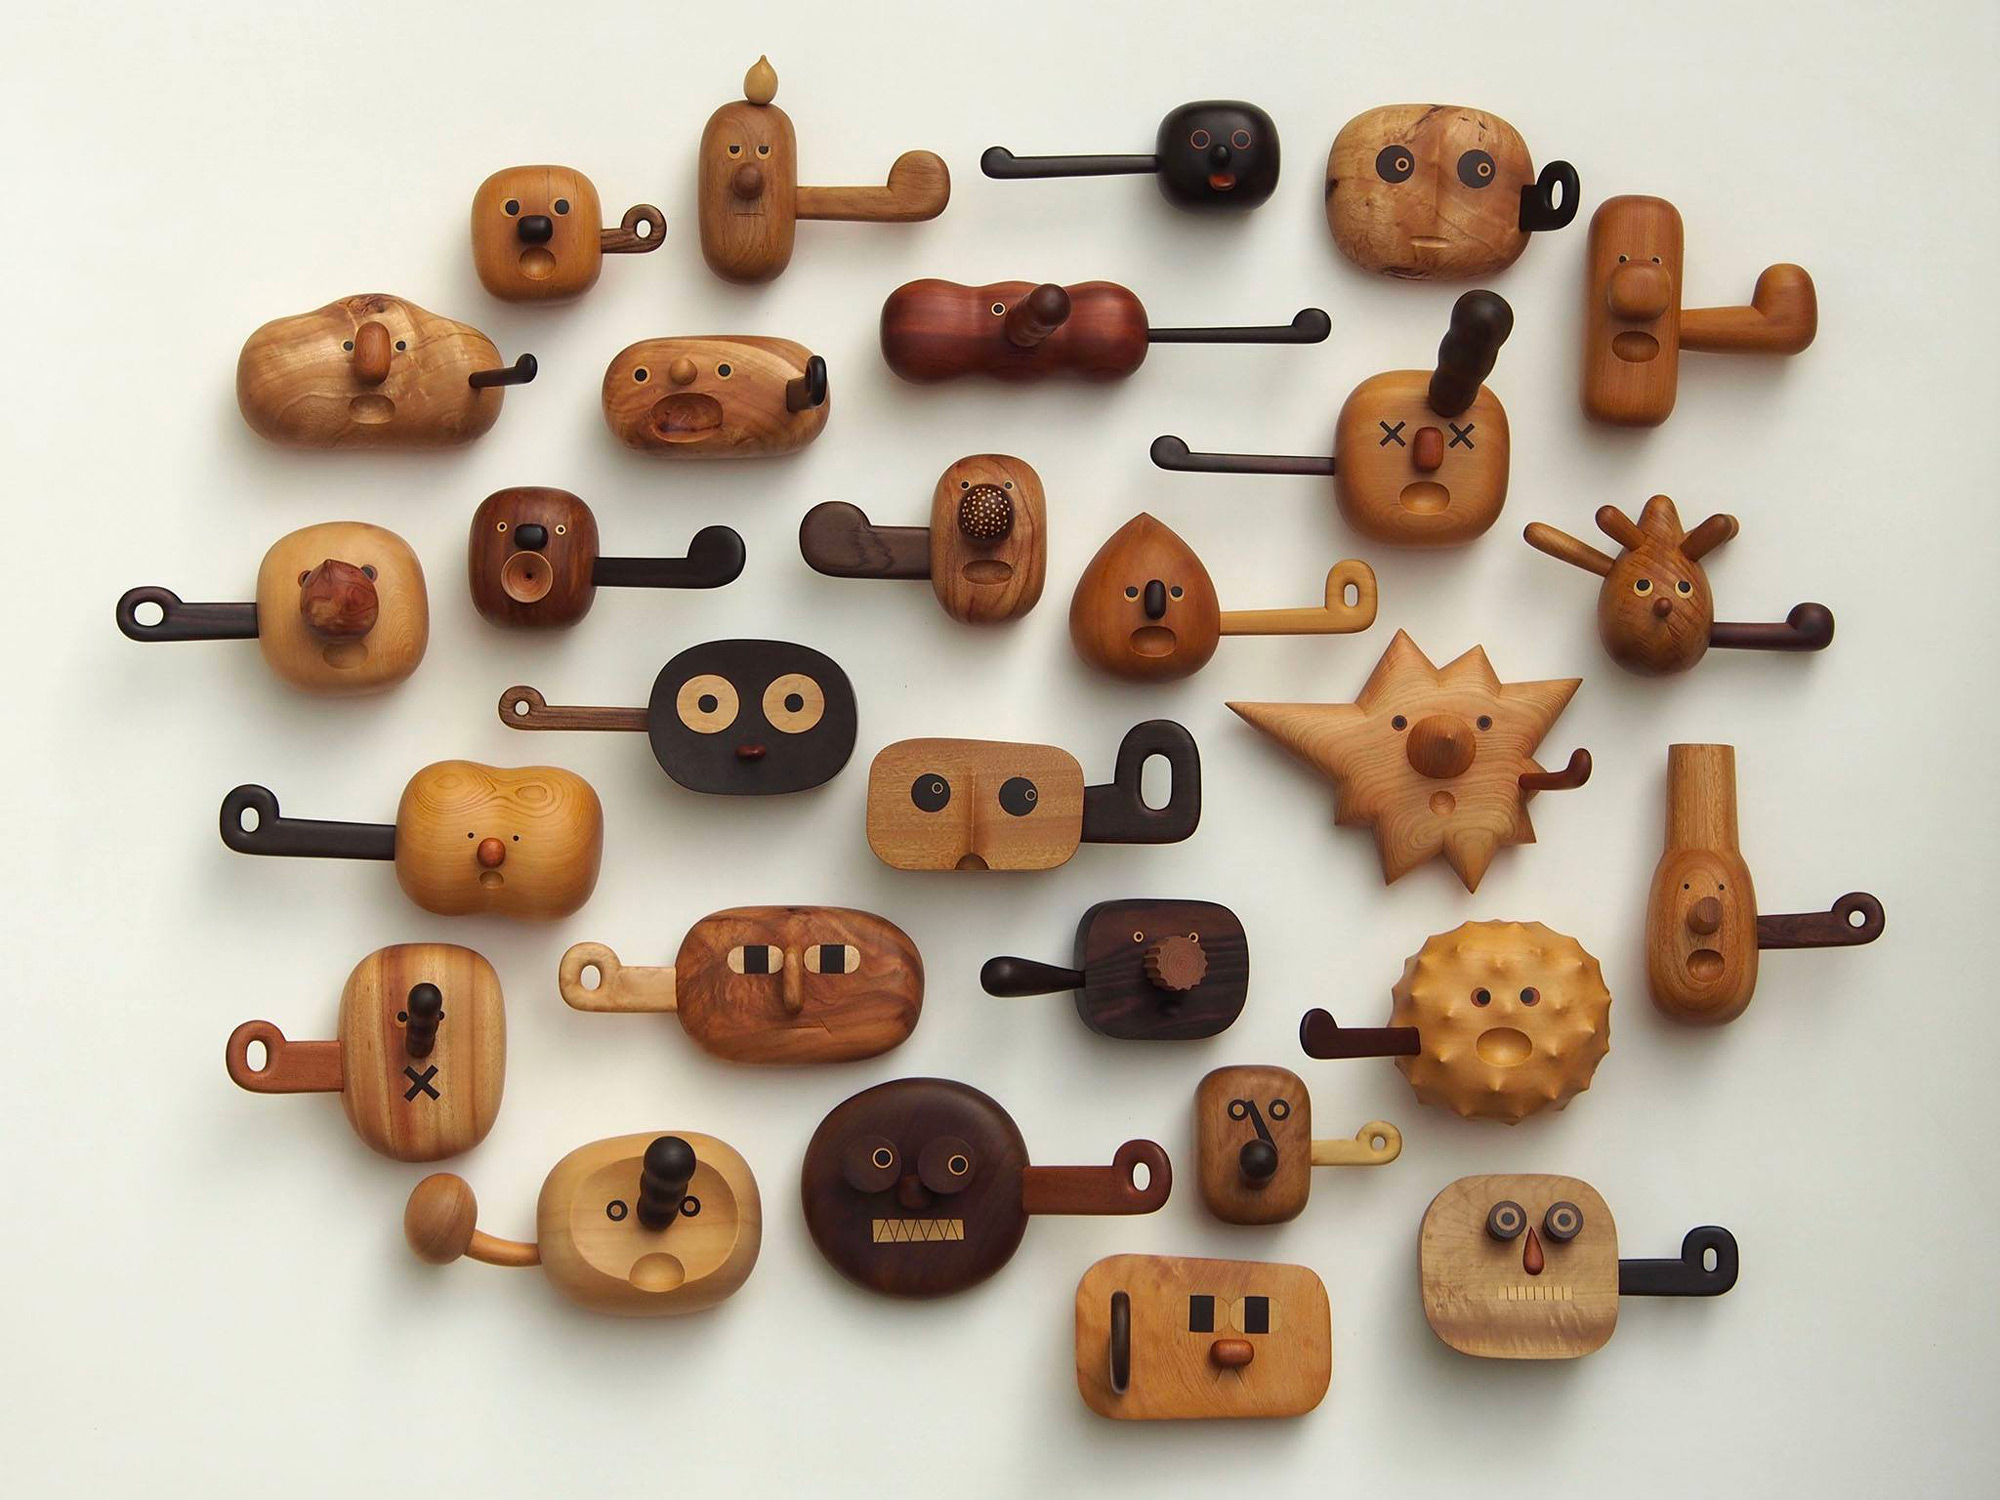 Hand-Carved Wood Sculptures by Jui-Lin Yen Capture Cartoonish Facial Expressions